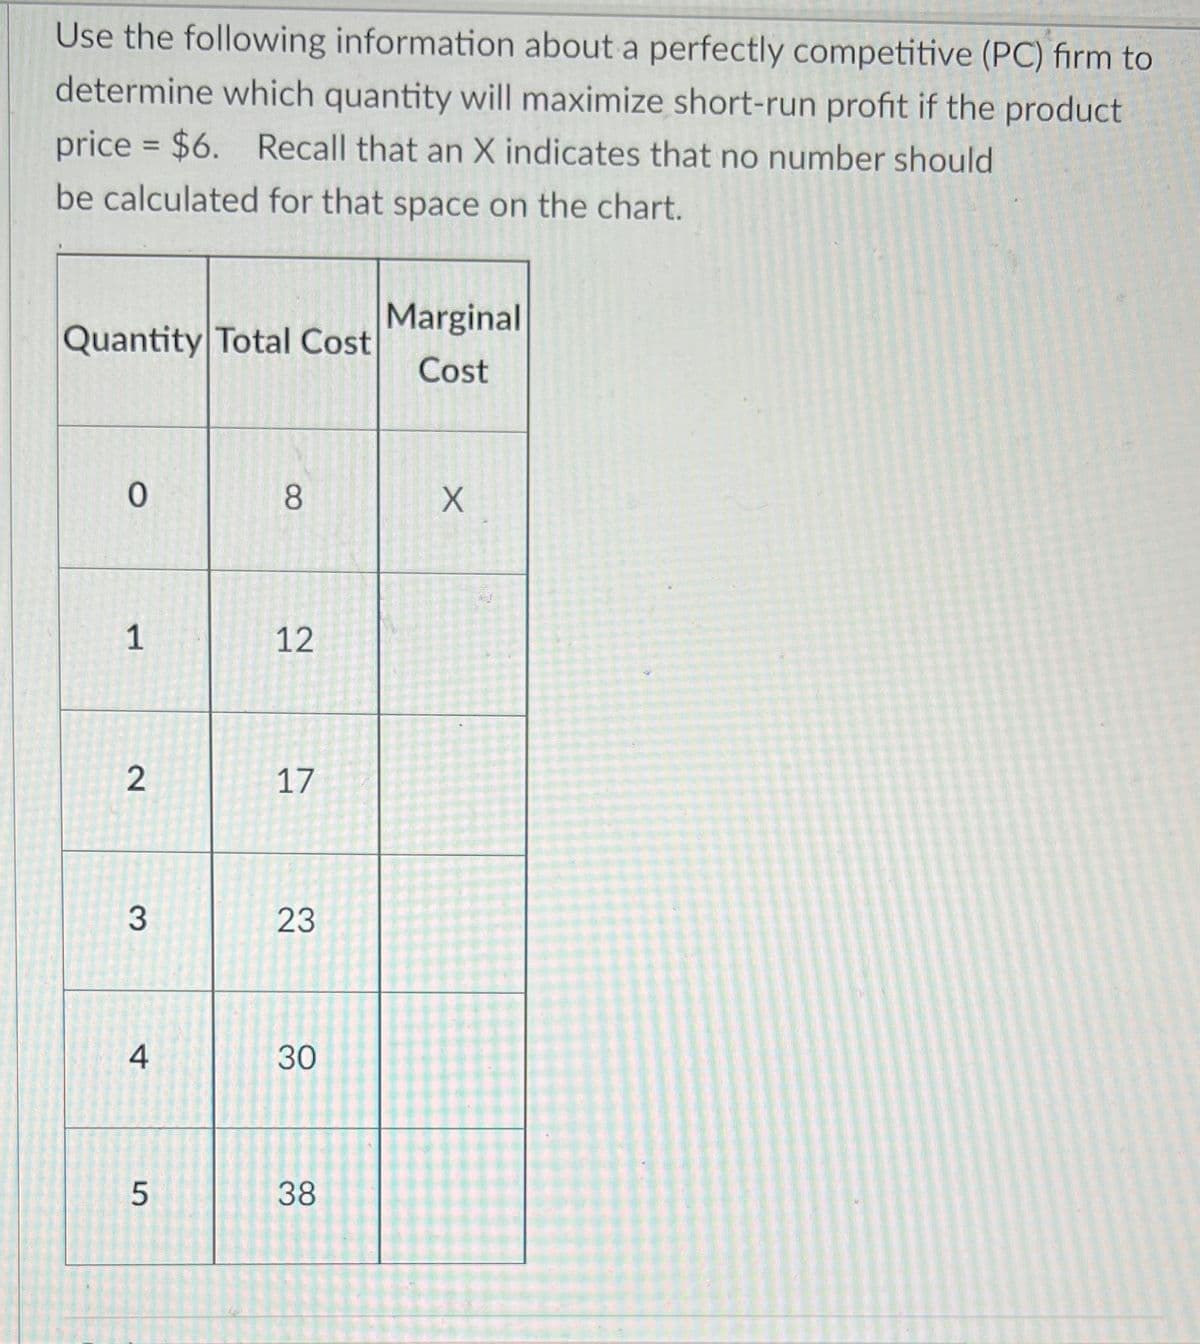 Use the following information about a perfectly competitive (PC) firm to
determine which quantity will maximize short-run profit if the product
price = $6. Recall that an X indicates that no number should
%3D
be calculated for that space on the chart.
Marginal
Quantity Total Cost
Cost
8.
12
17
3
4
30
38
23
1,
2.
